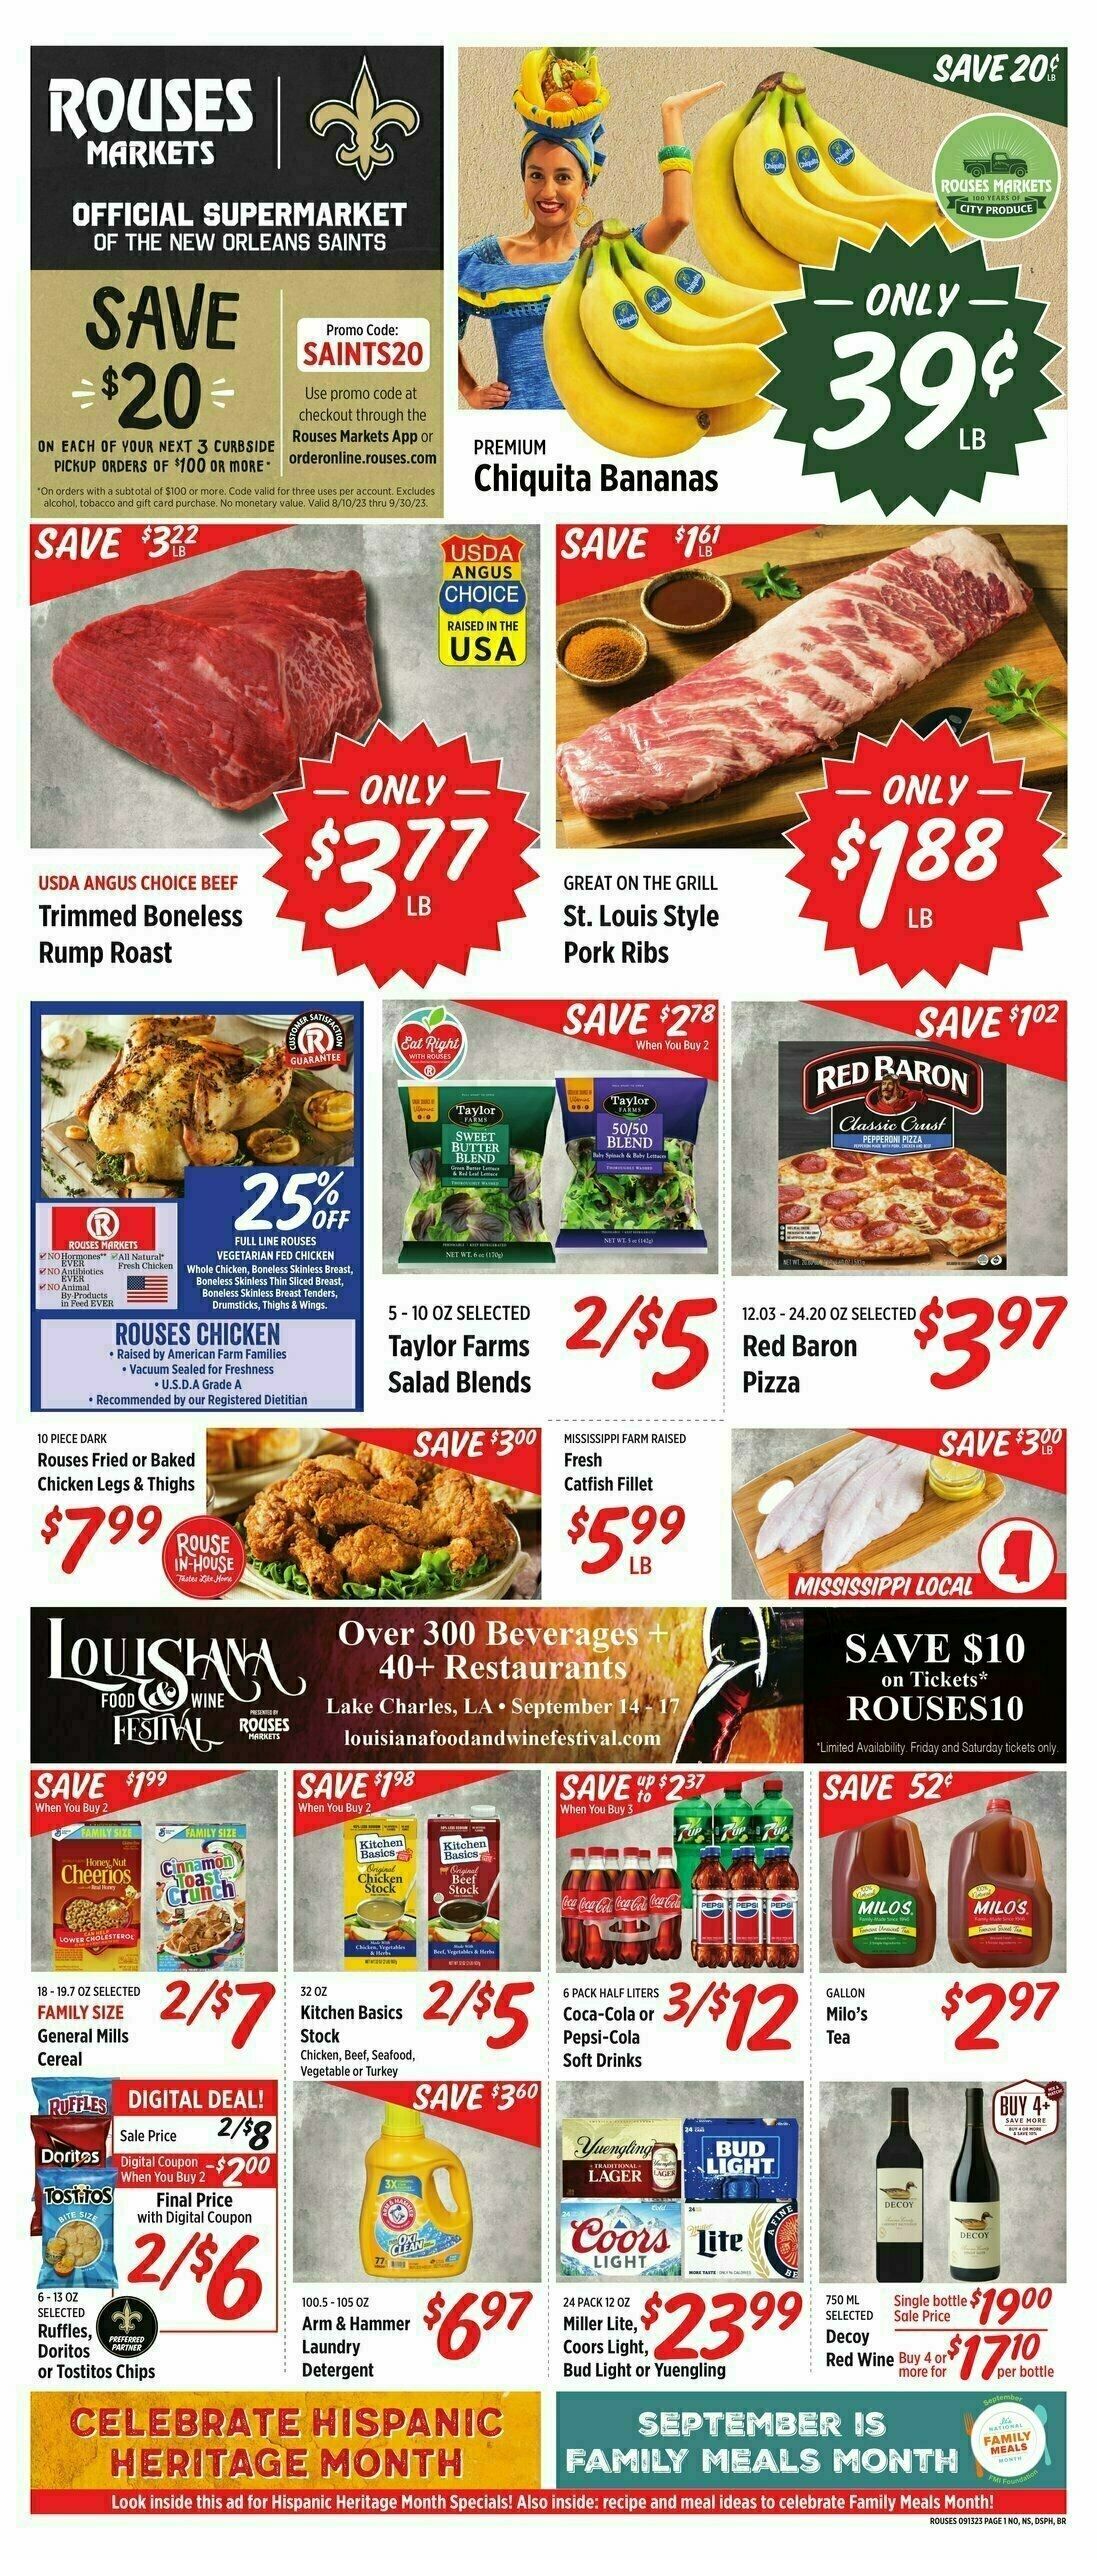 Rouses Markets Weekly Ad from September 13